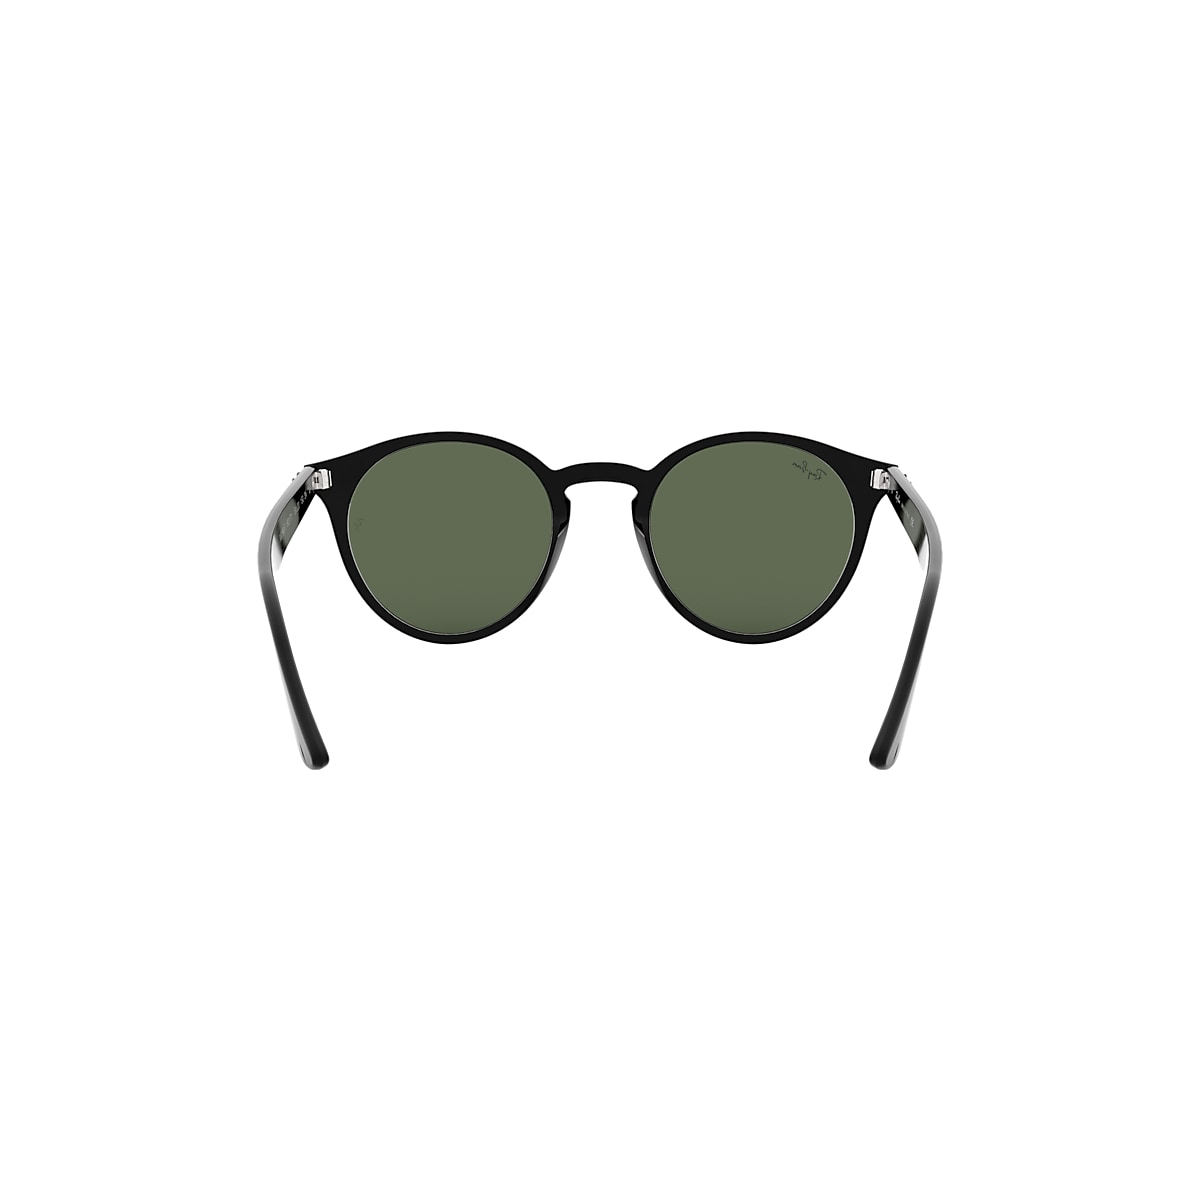 RB2180 Sunglasses in Black and Green - RB2180F | Ray-Ban® US